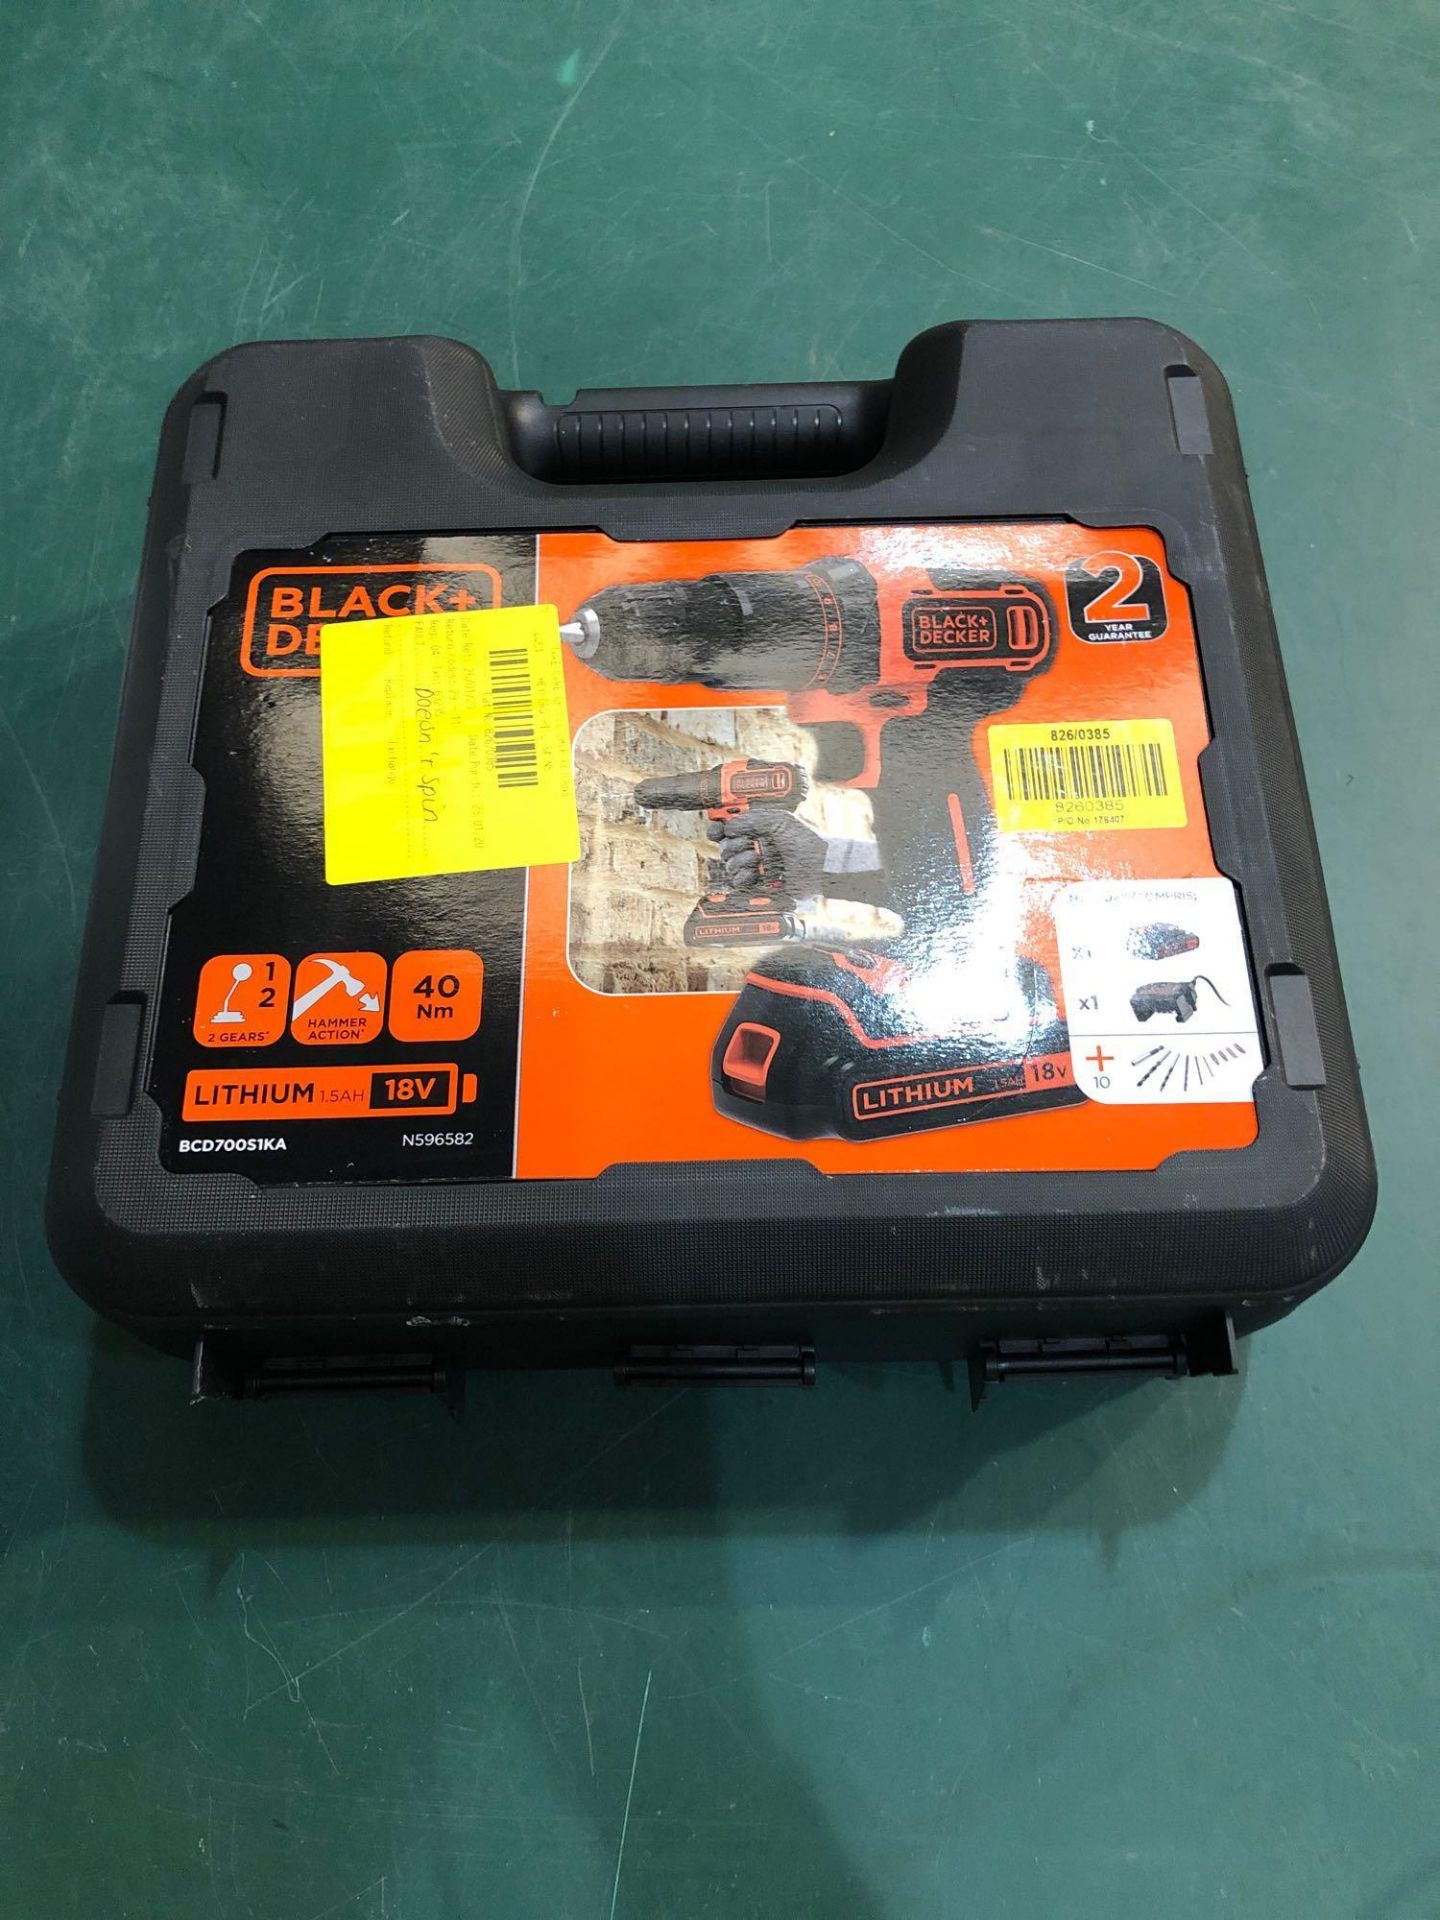 Black + Decker Cordless Hammer Drill with Battery - 18V 826/0385 £50.00 RRP - Image 2 of 4